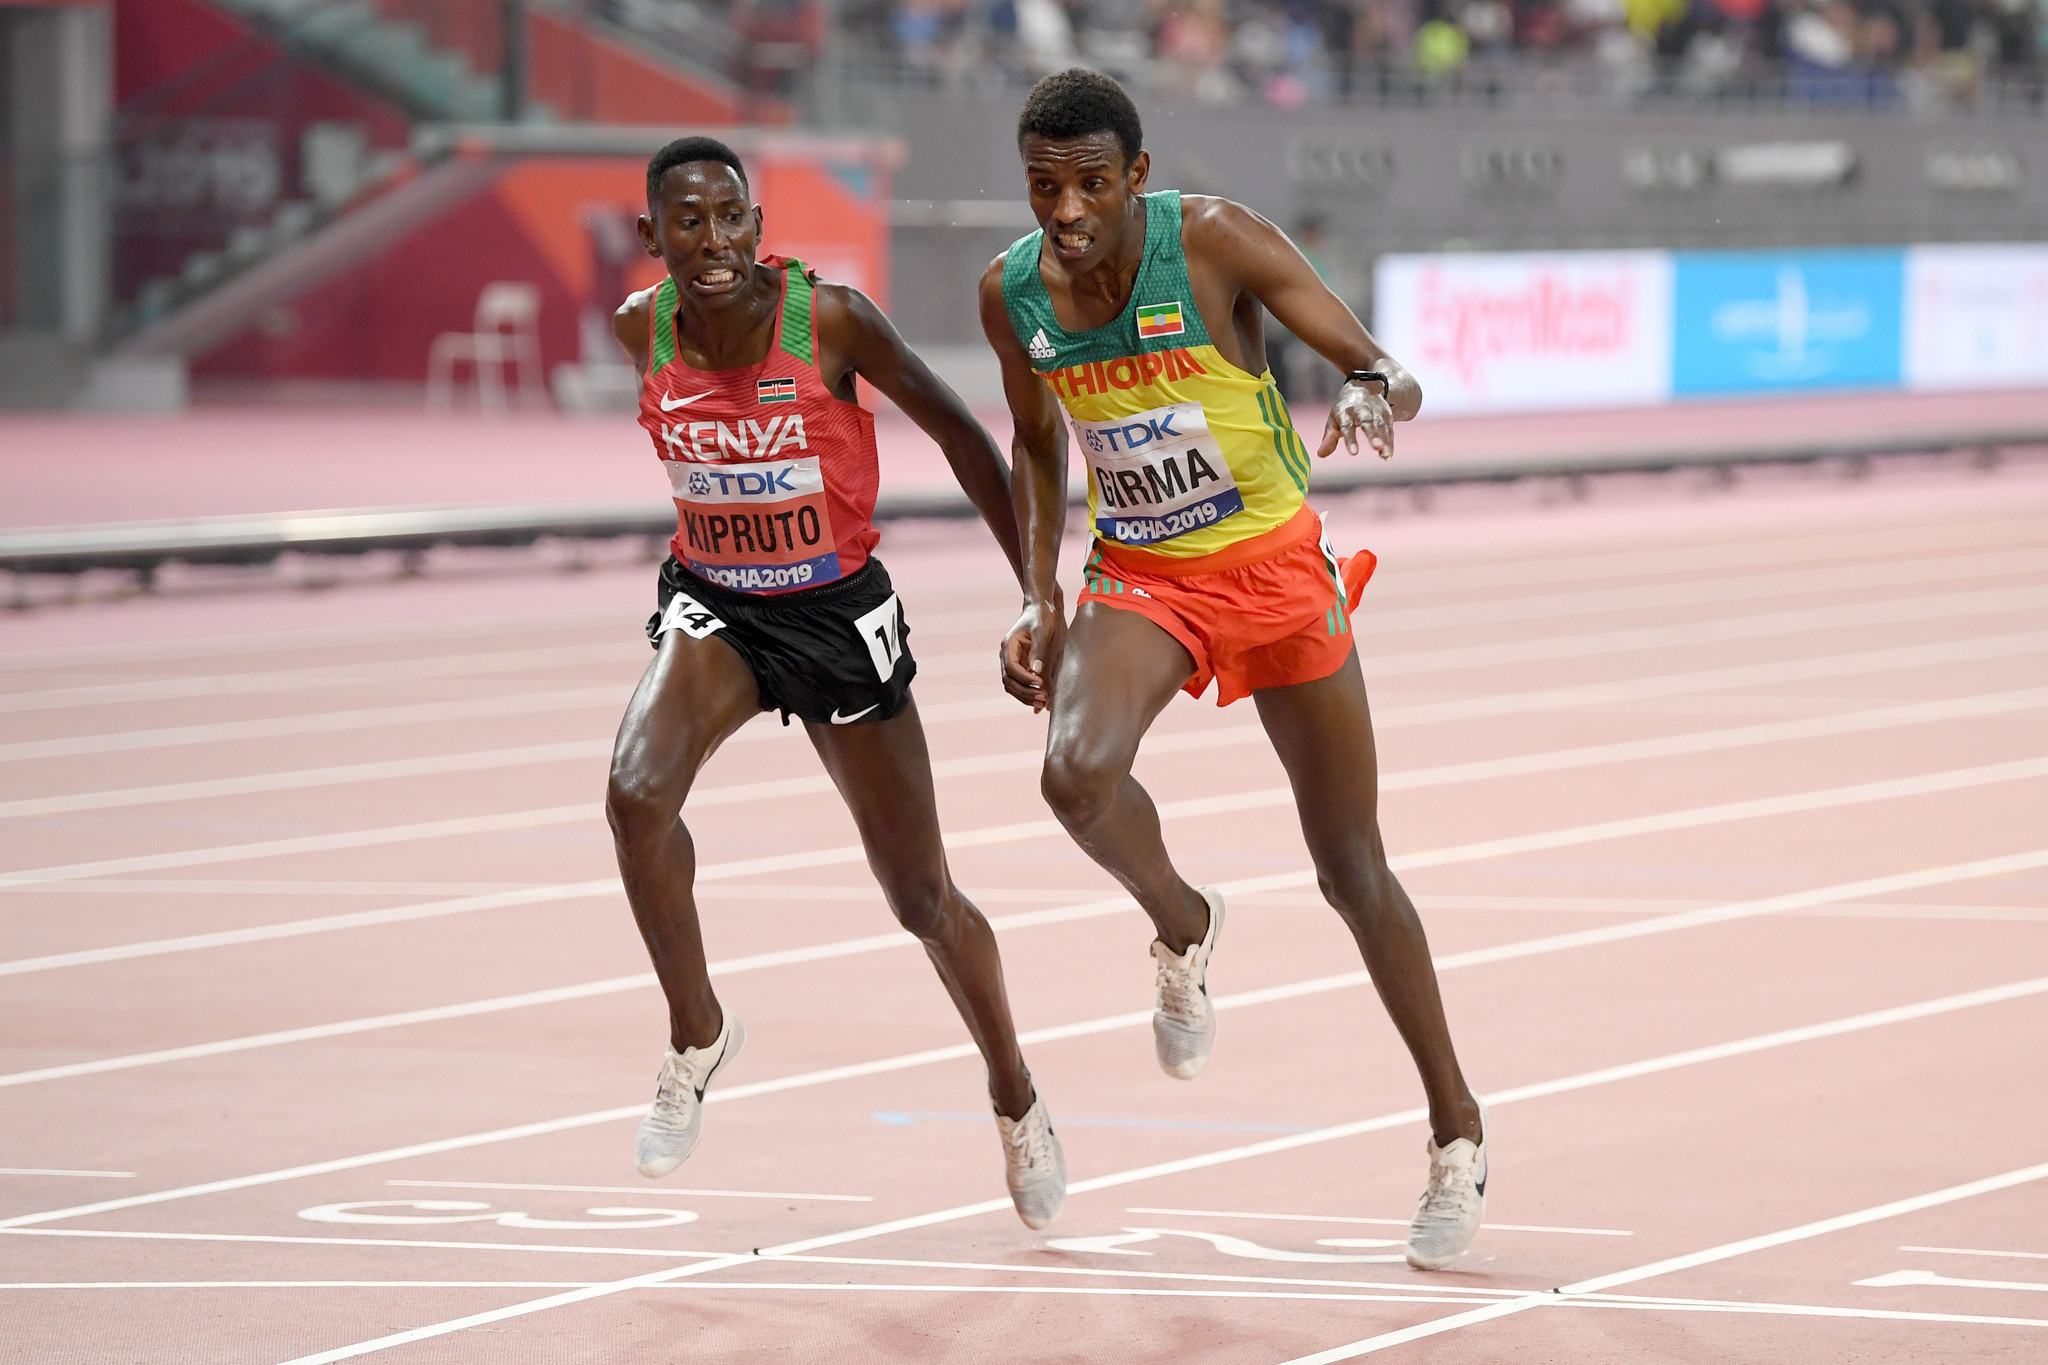 The men's 3,000m steeplechase produced an exciting finish with Kenya's Conseslus Kipruto beating Ethiopia's Lamecha Girma by just one-hundredth of a second ©Getty Images